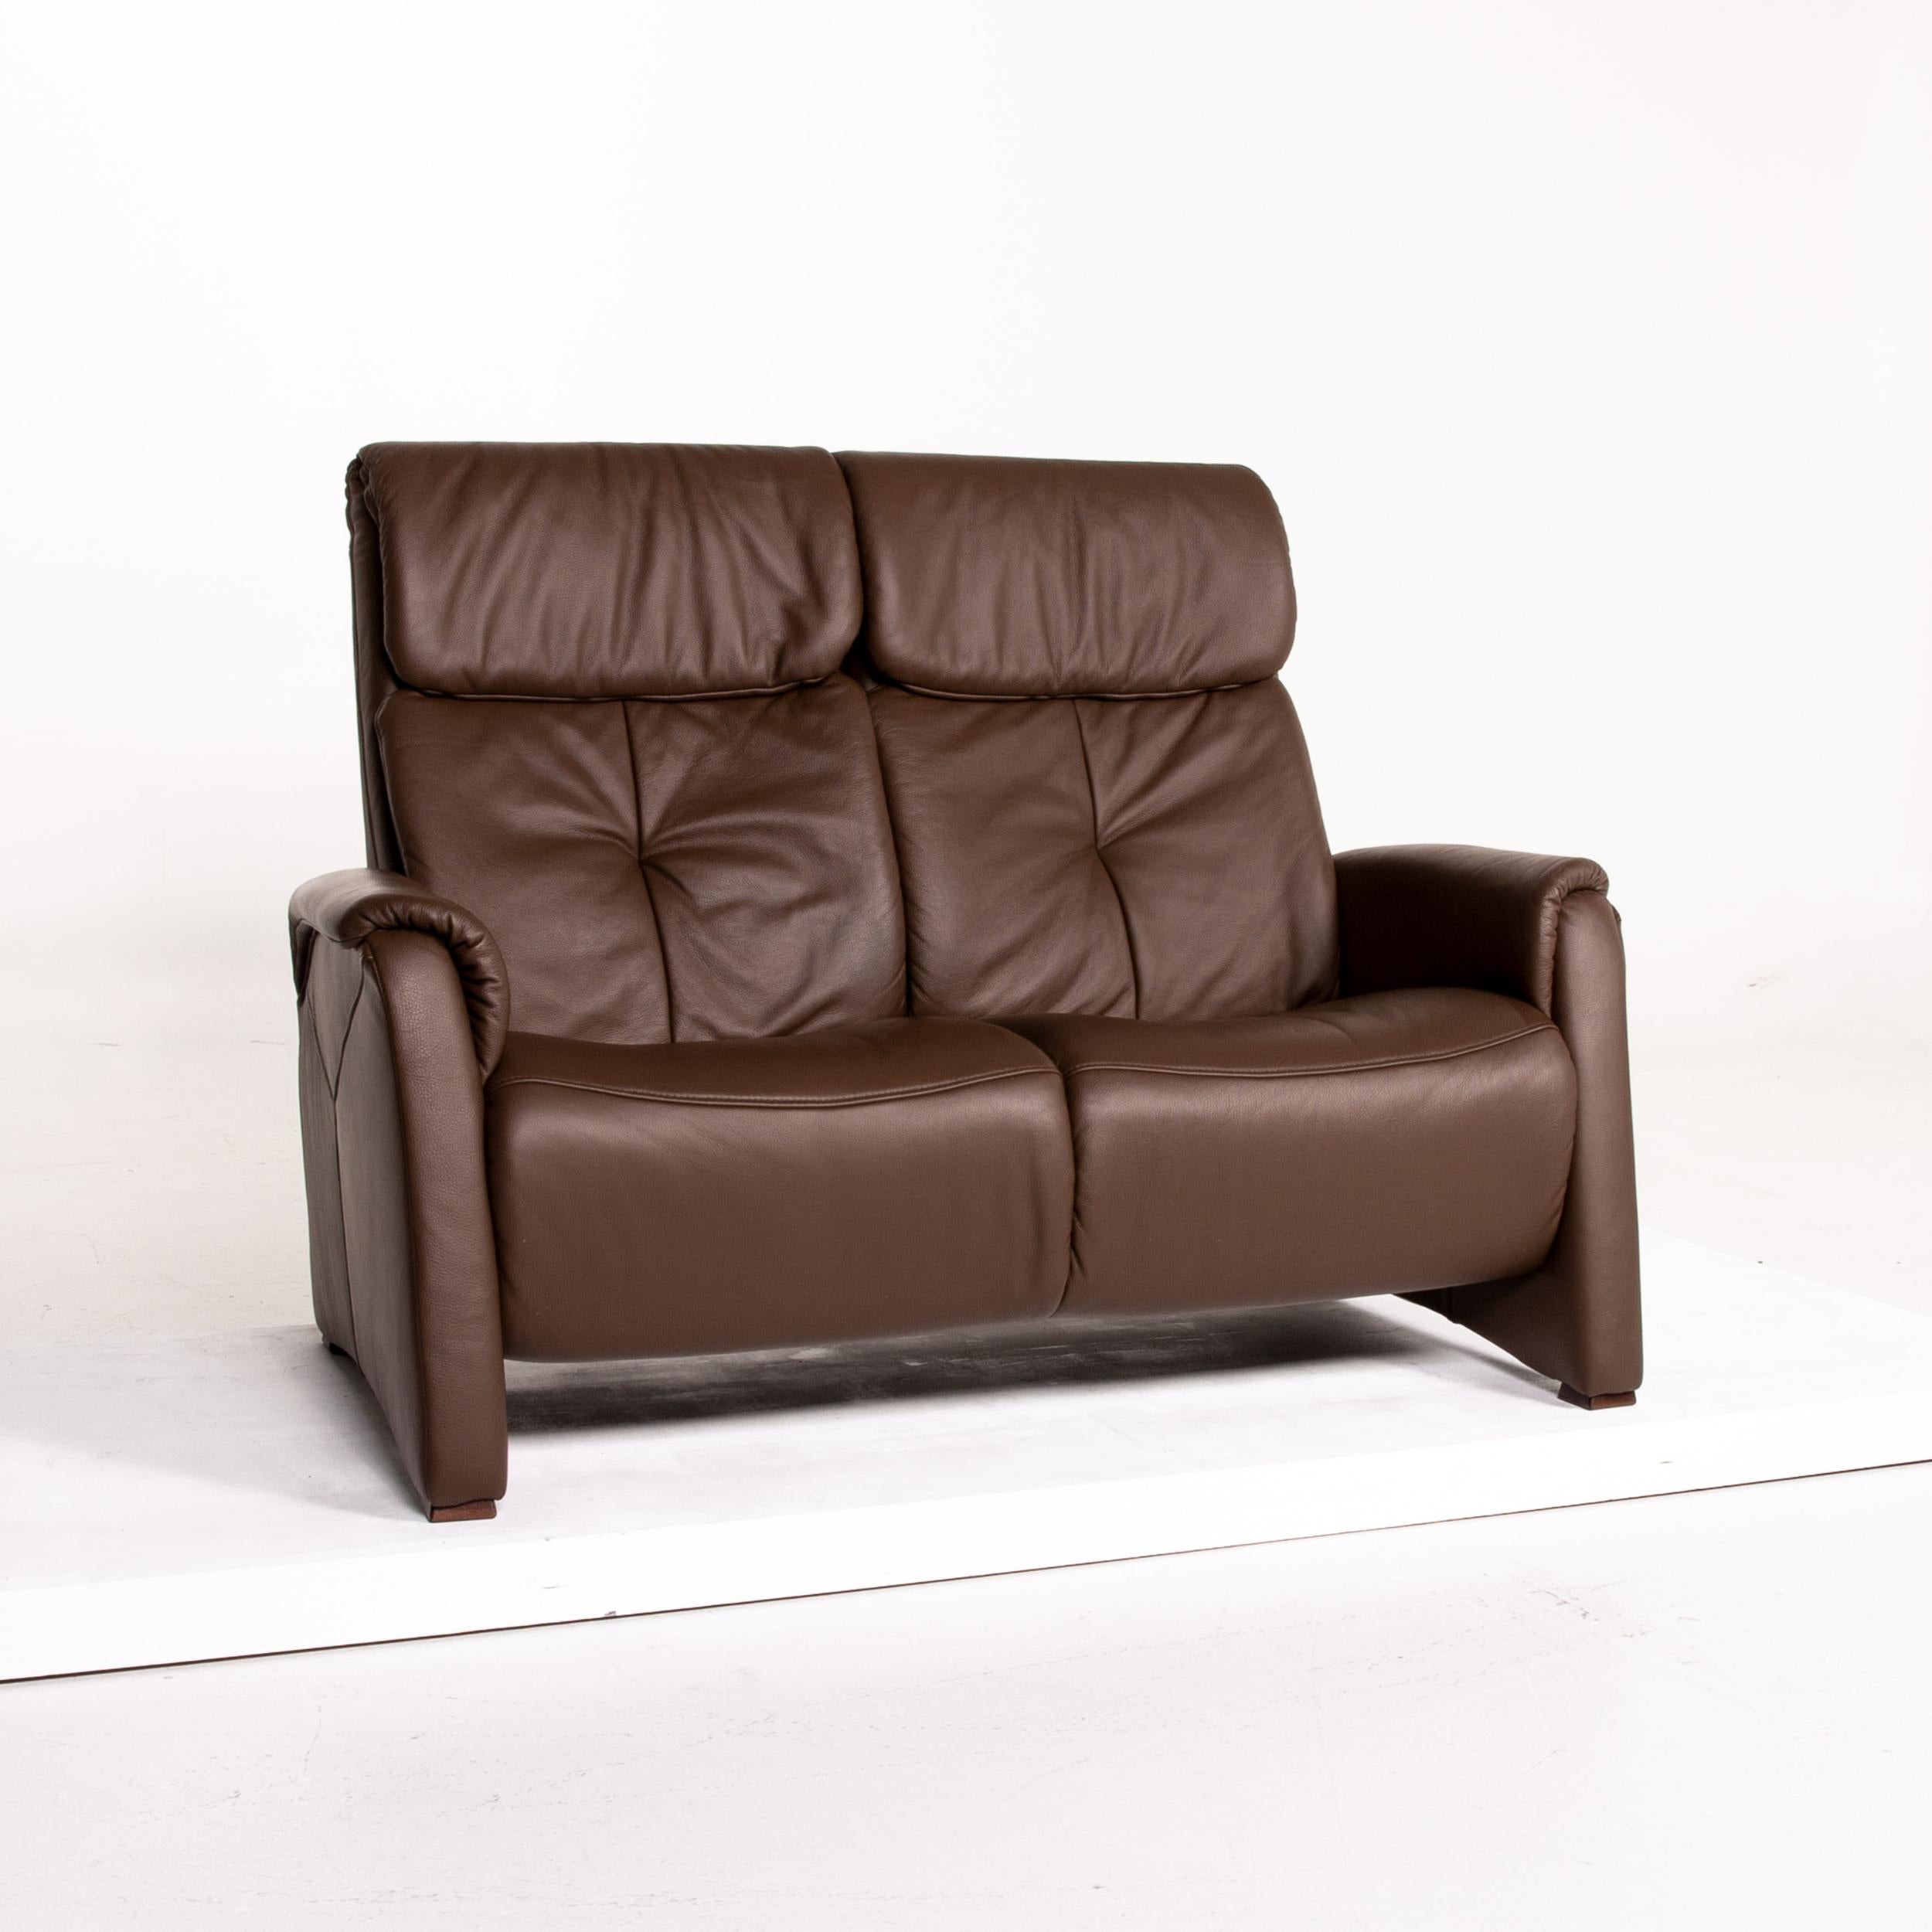 Modern Himolla Leather Sofa Dark Brown Brown Two-Seat Function Relax Function Couch For Sale